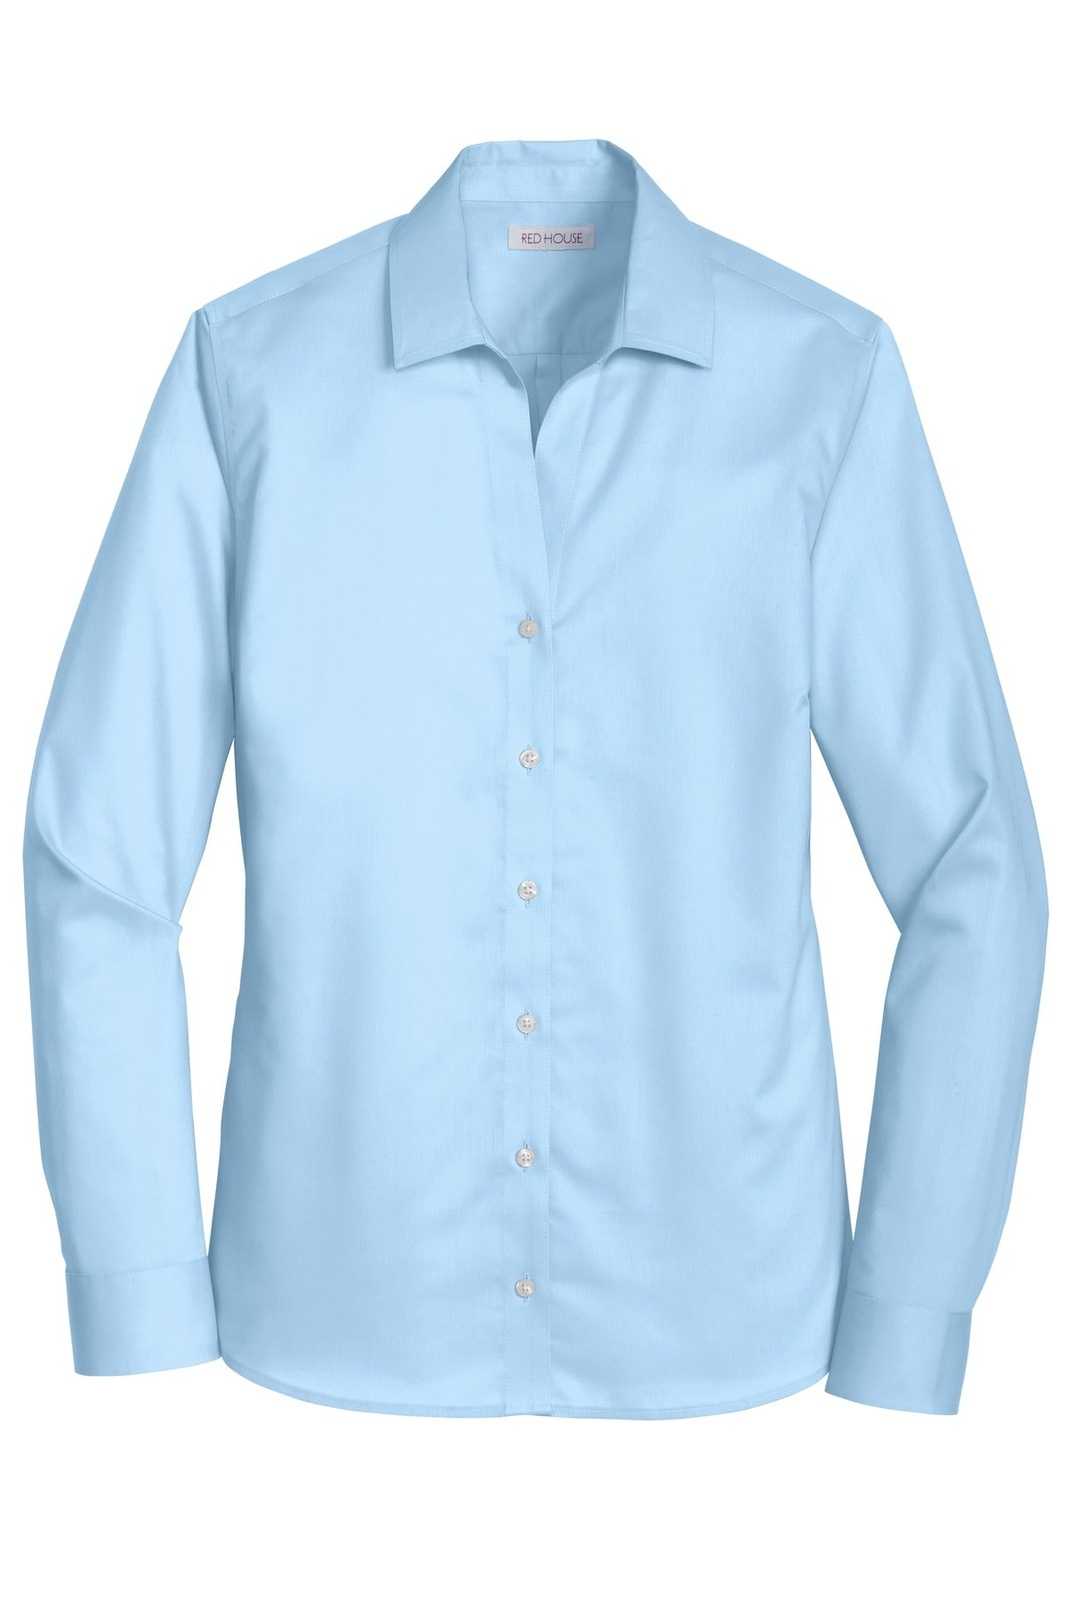 Red House RH79 Ladies Non-Iron Twill Shirt - Heritage Blue - HIT a Double - 5